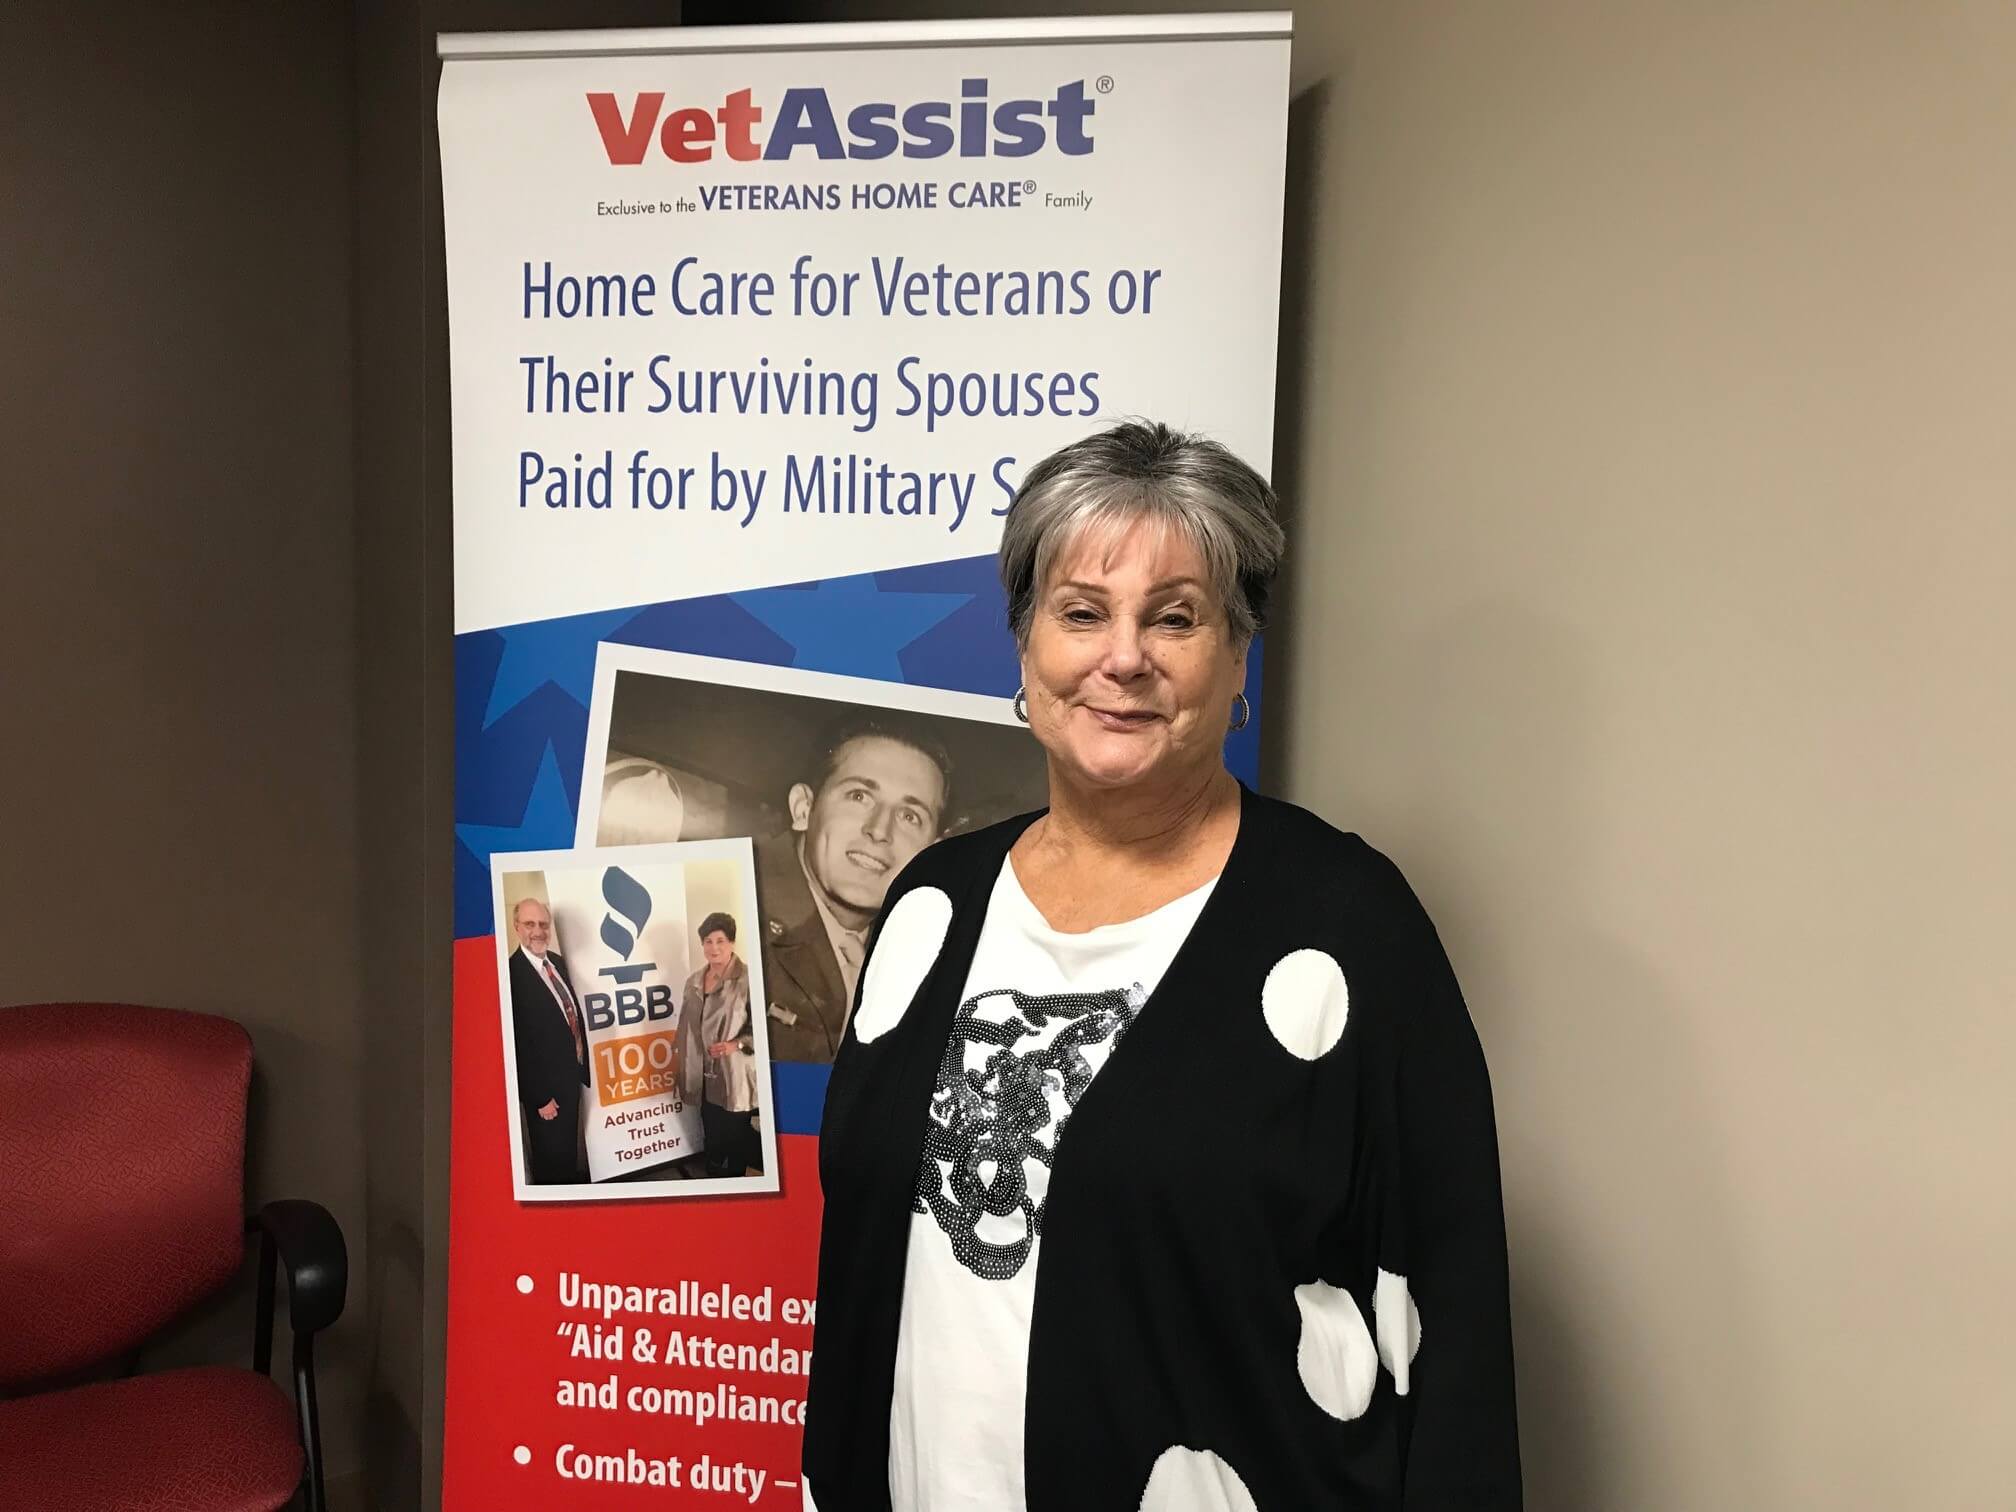 Bonnie Laiderman, founder of Veterans Home Care